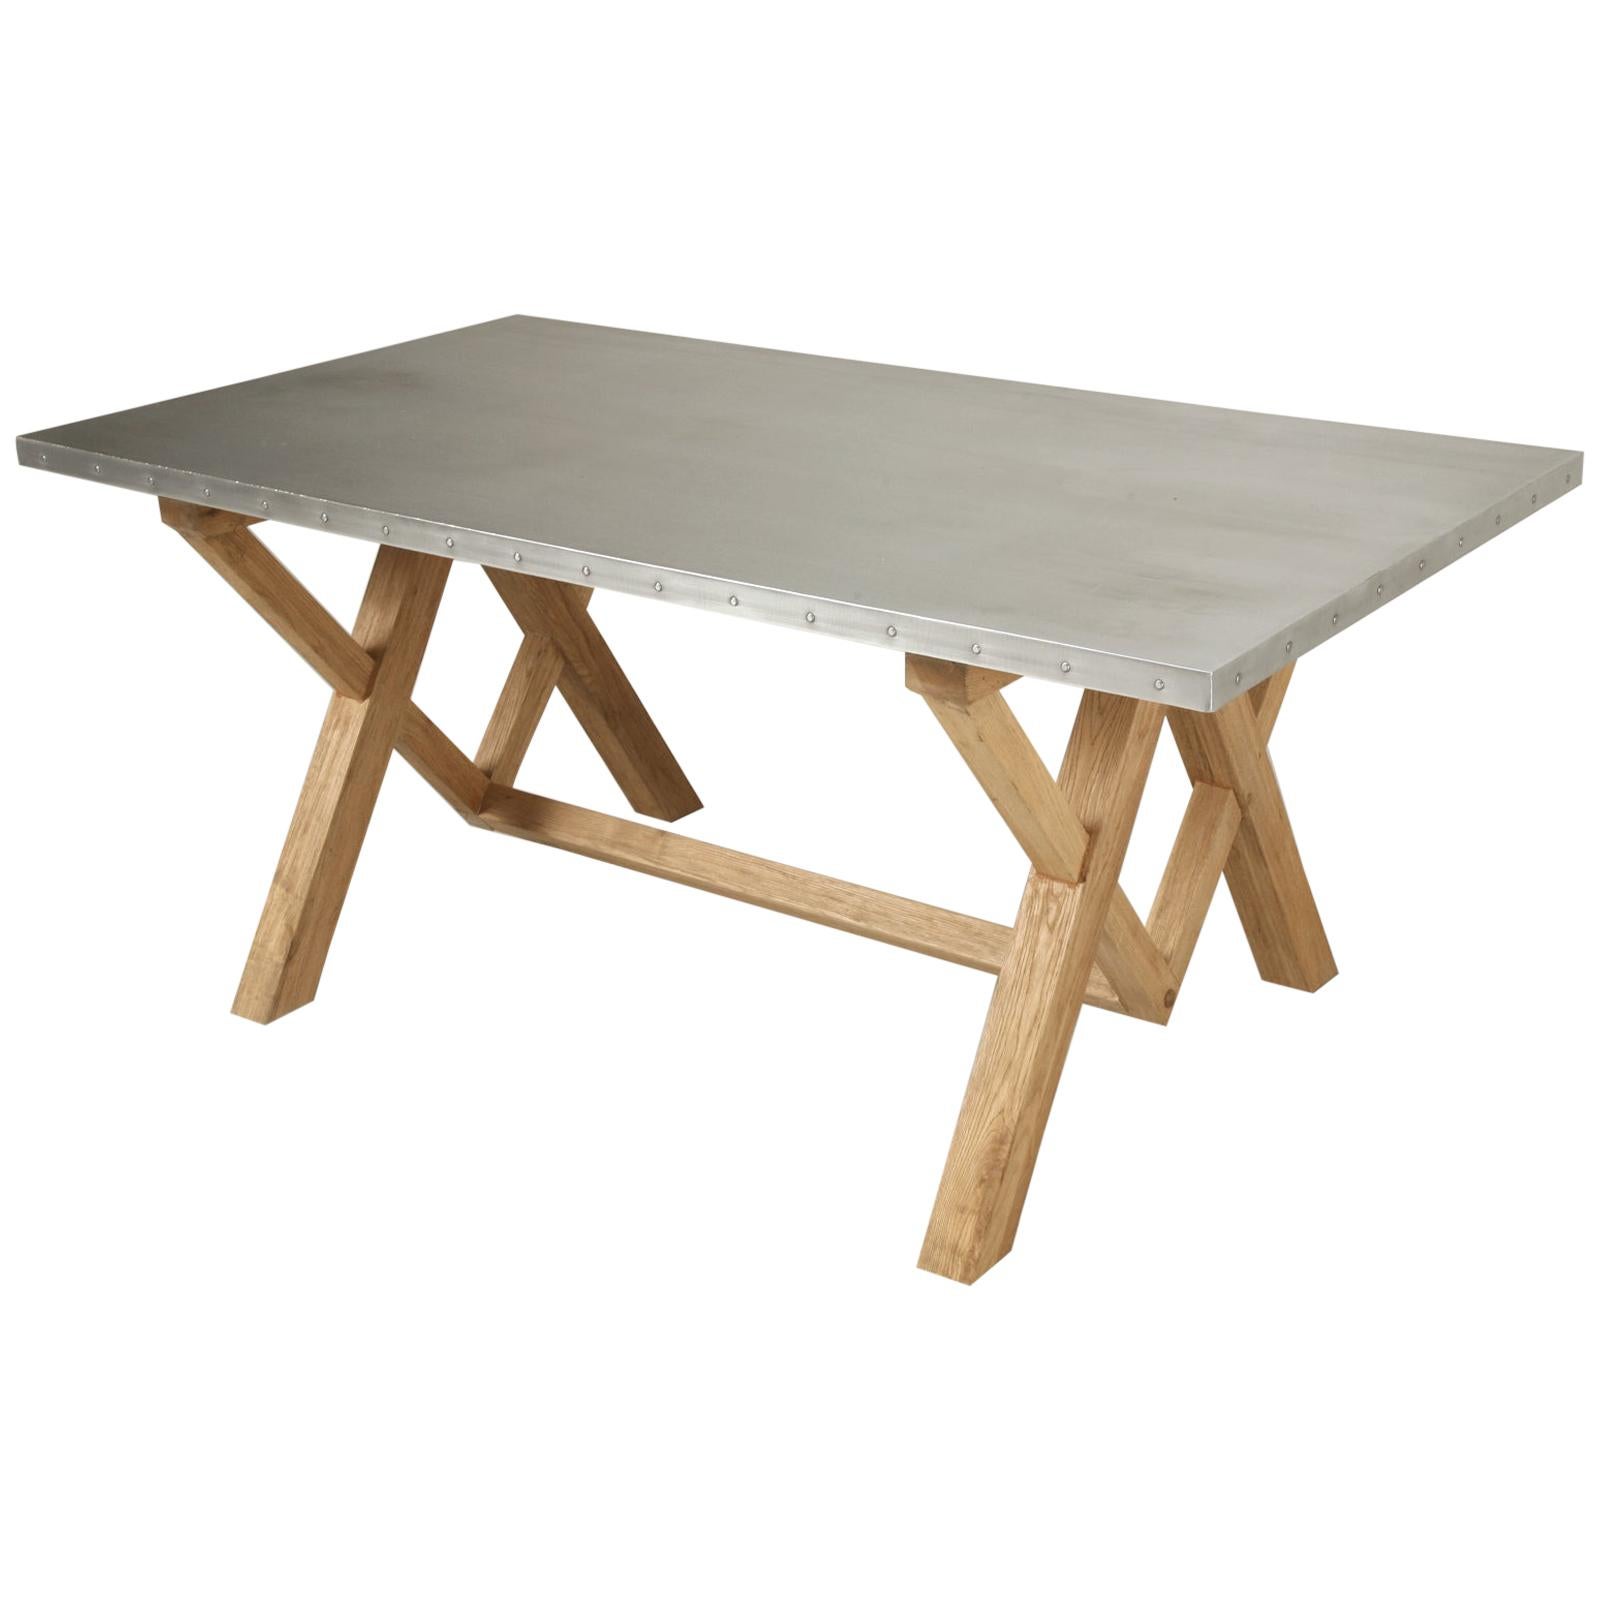 Original Zinc Top Farm Style Dining or Kitchen Table in Any Dimension